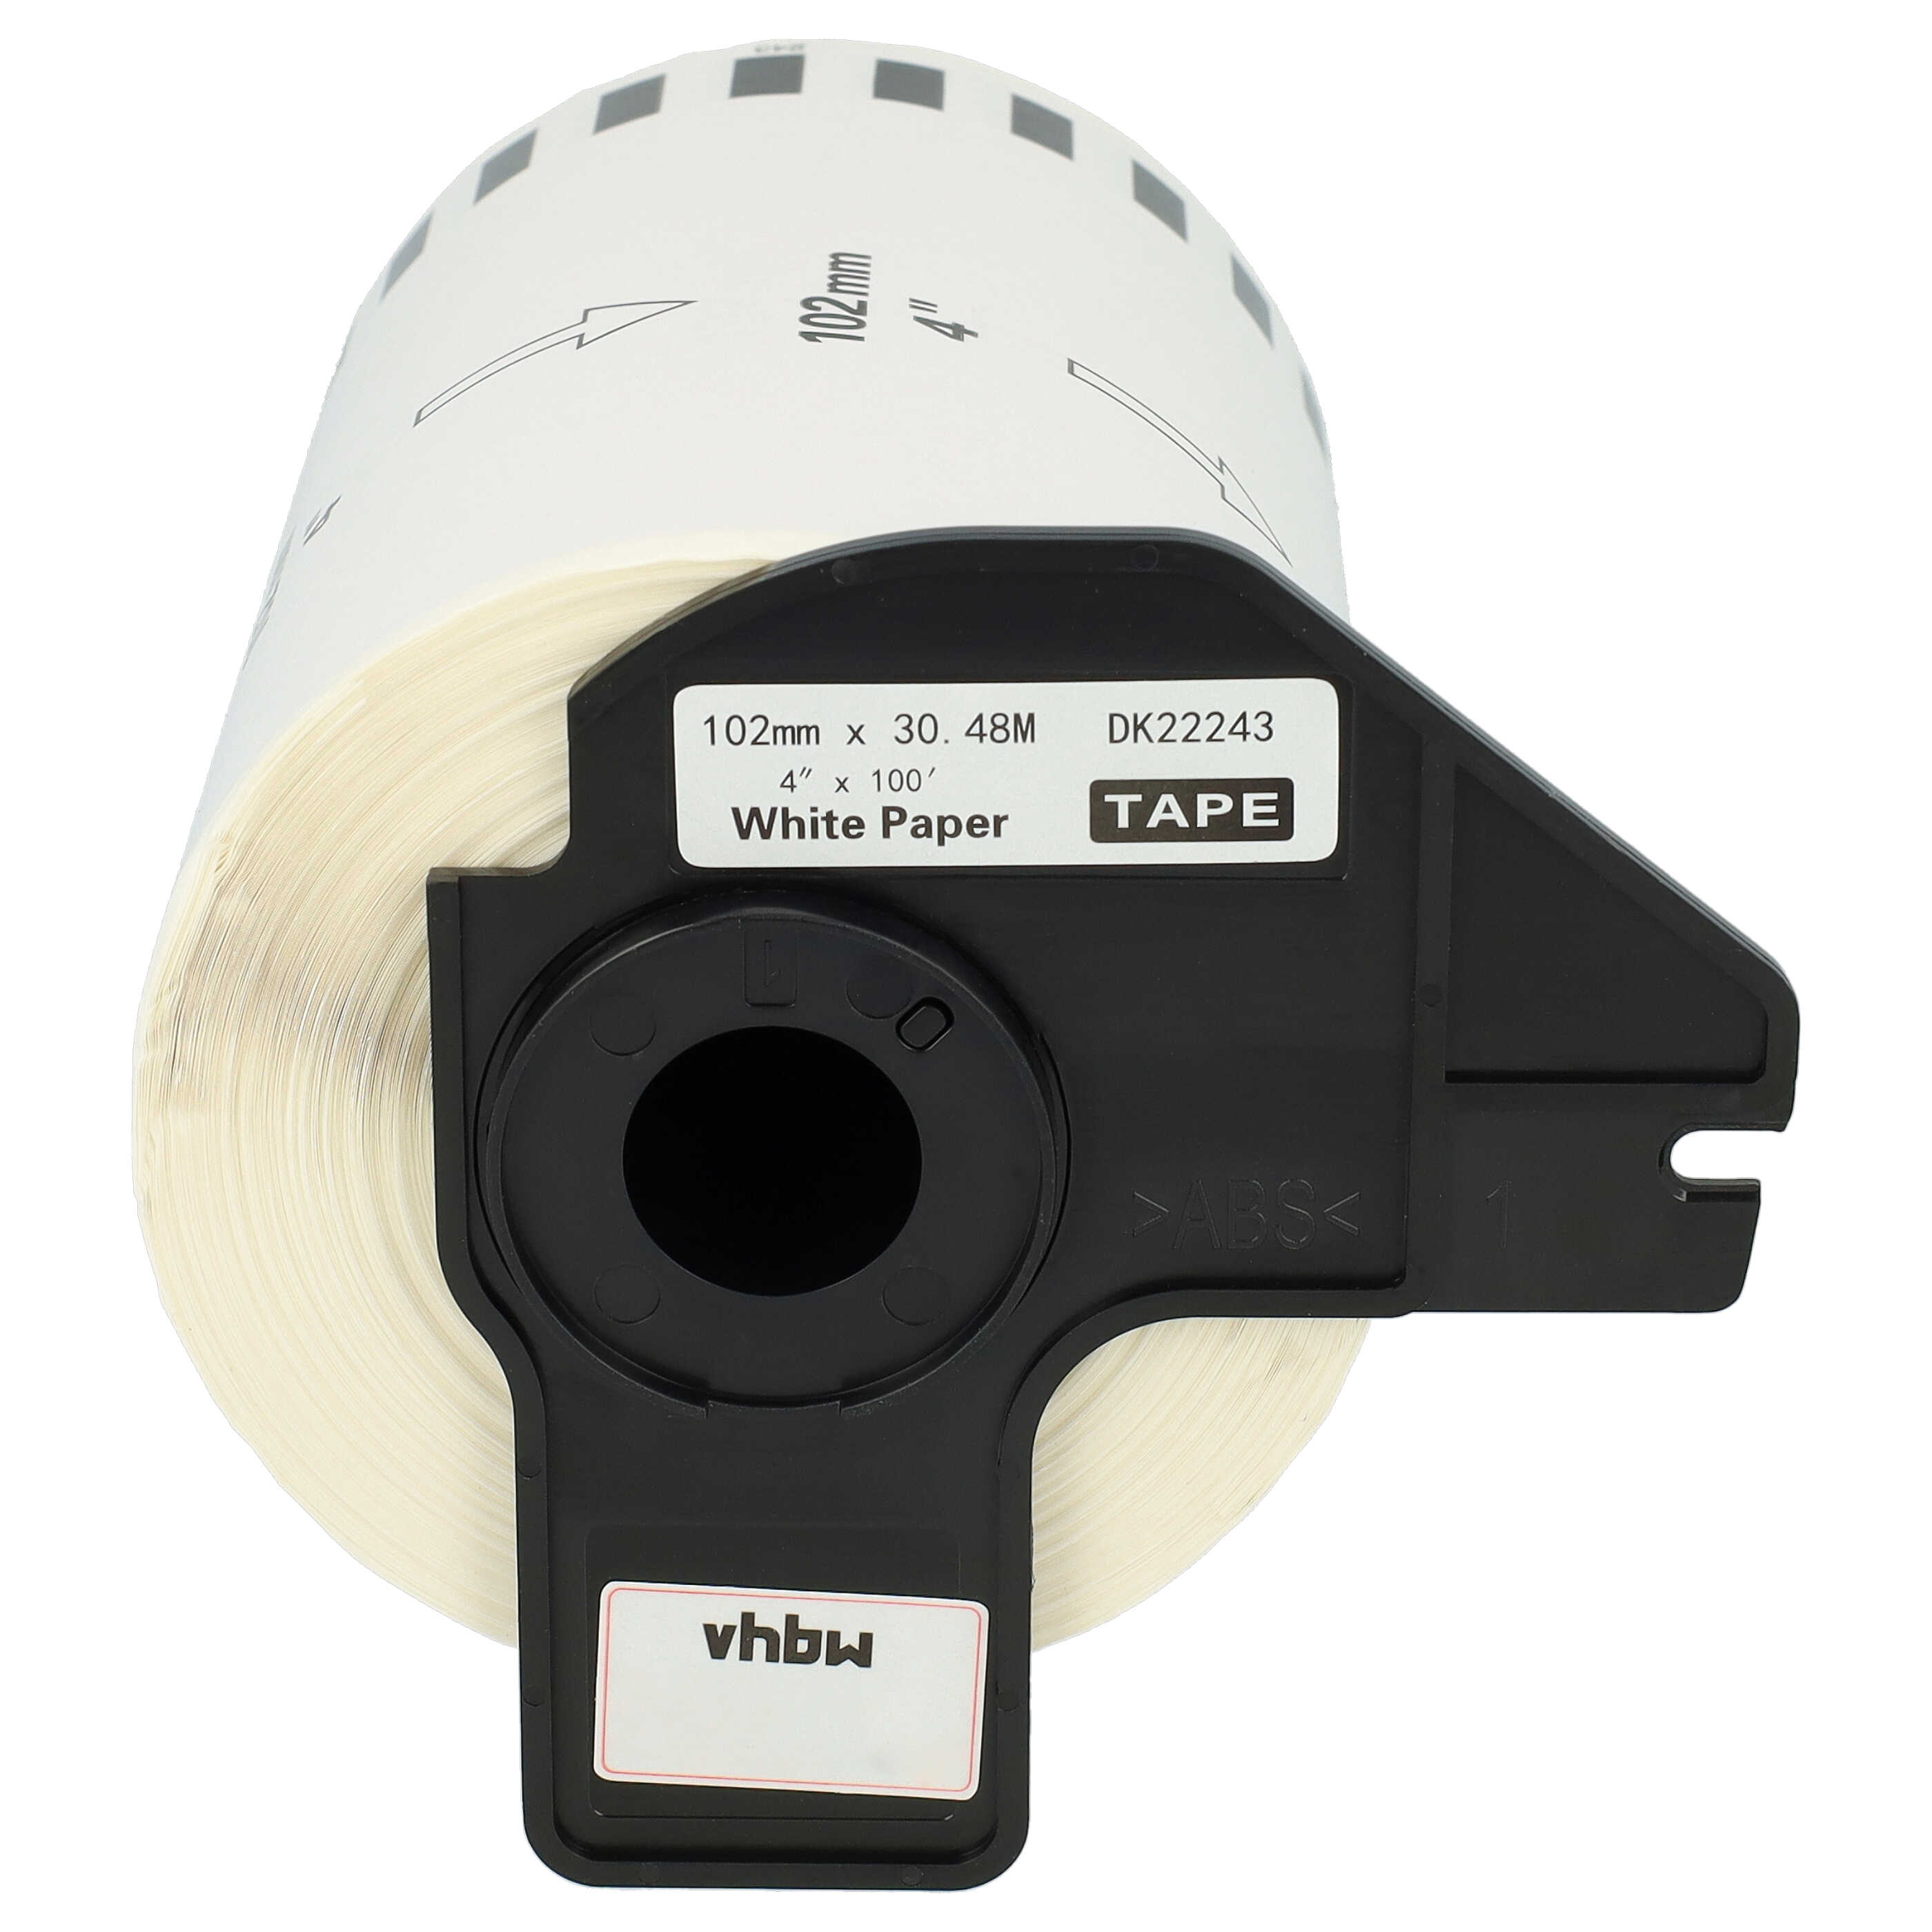 10x Labels replaces Brother DK-22243 for Labeller - 102 mm x 30.48m + Holder